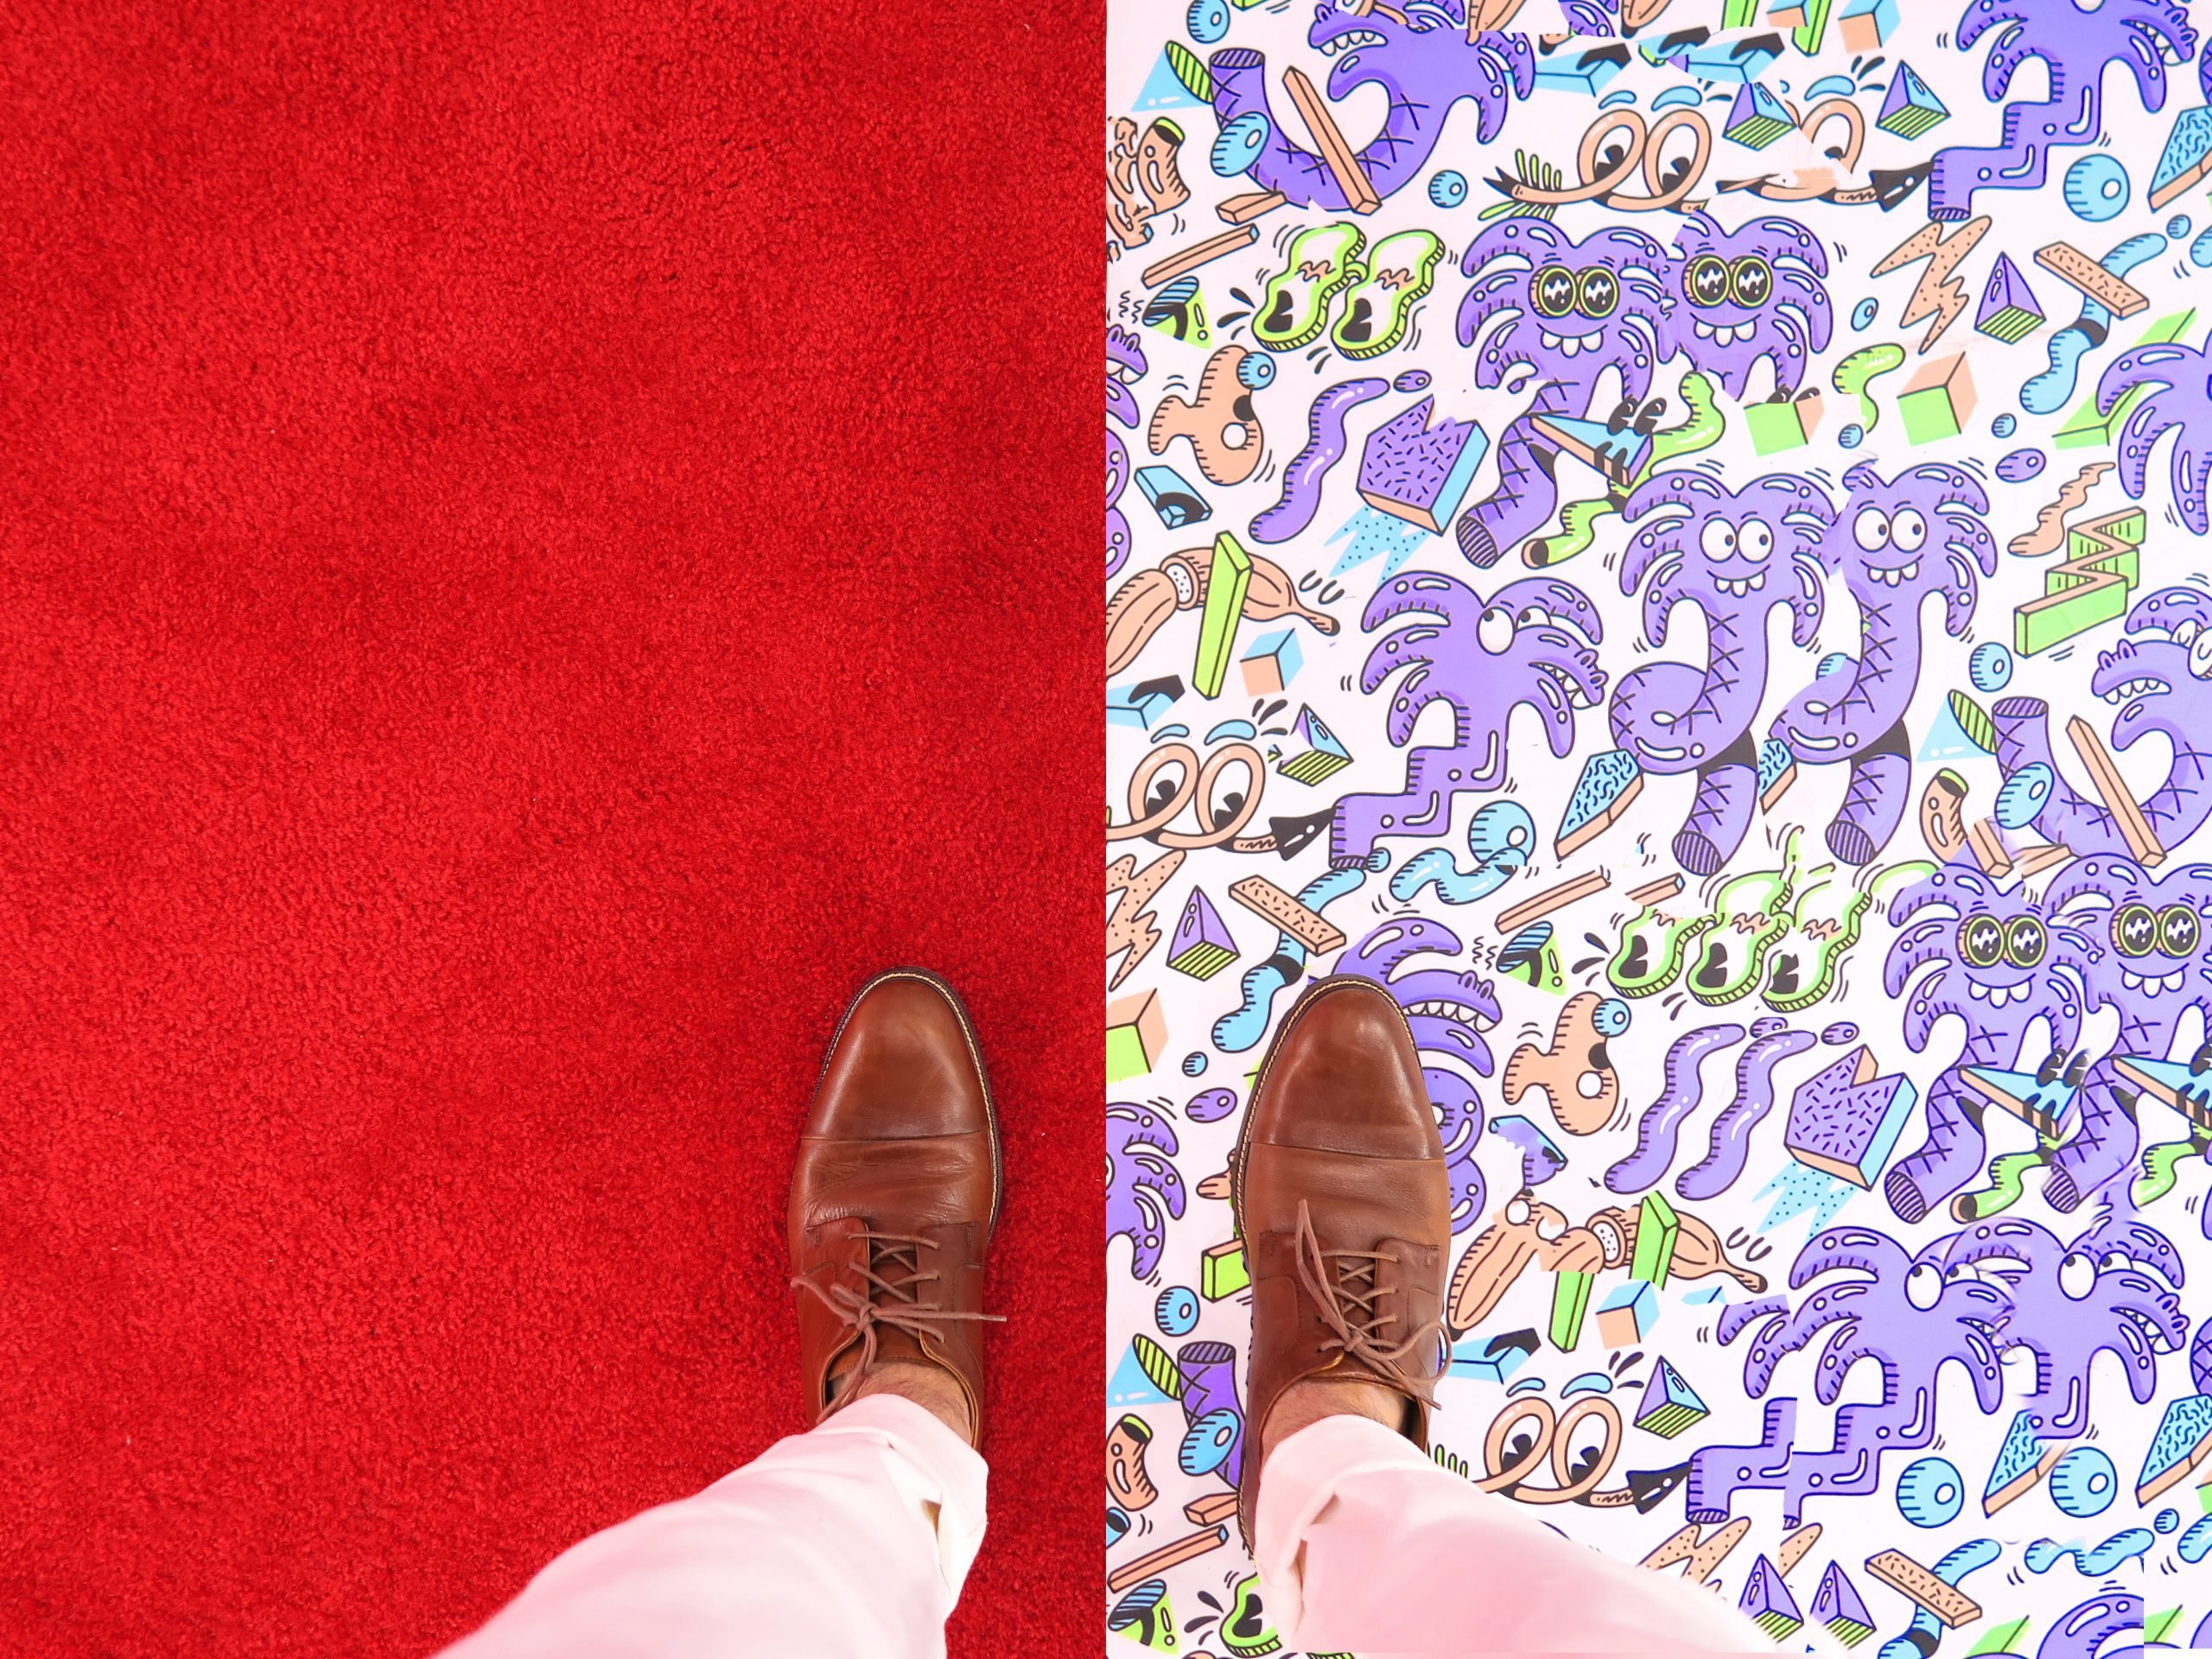 leather shows on a red carpet and carpet with elephants on it